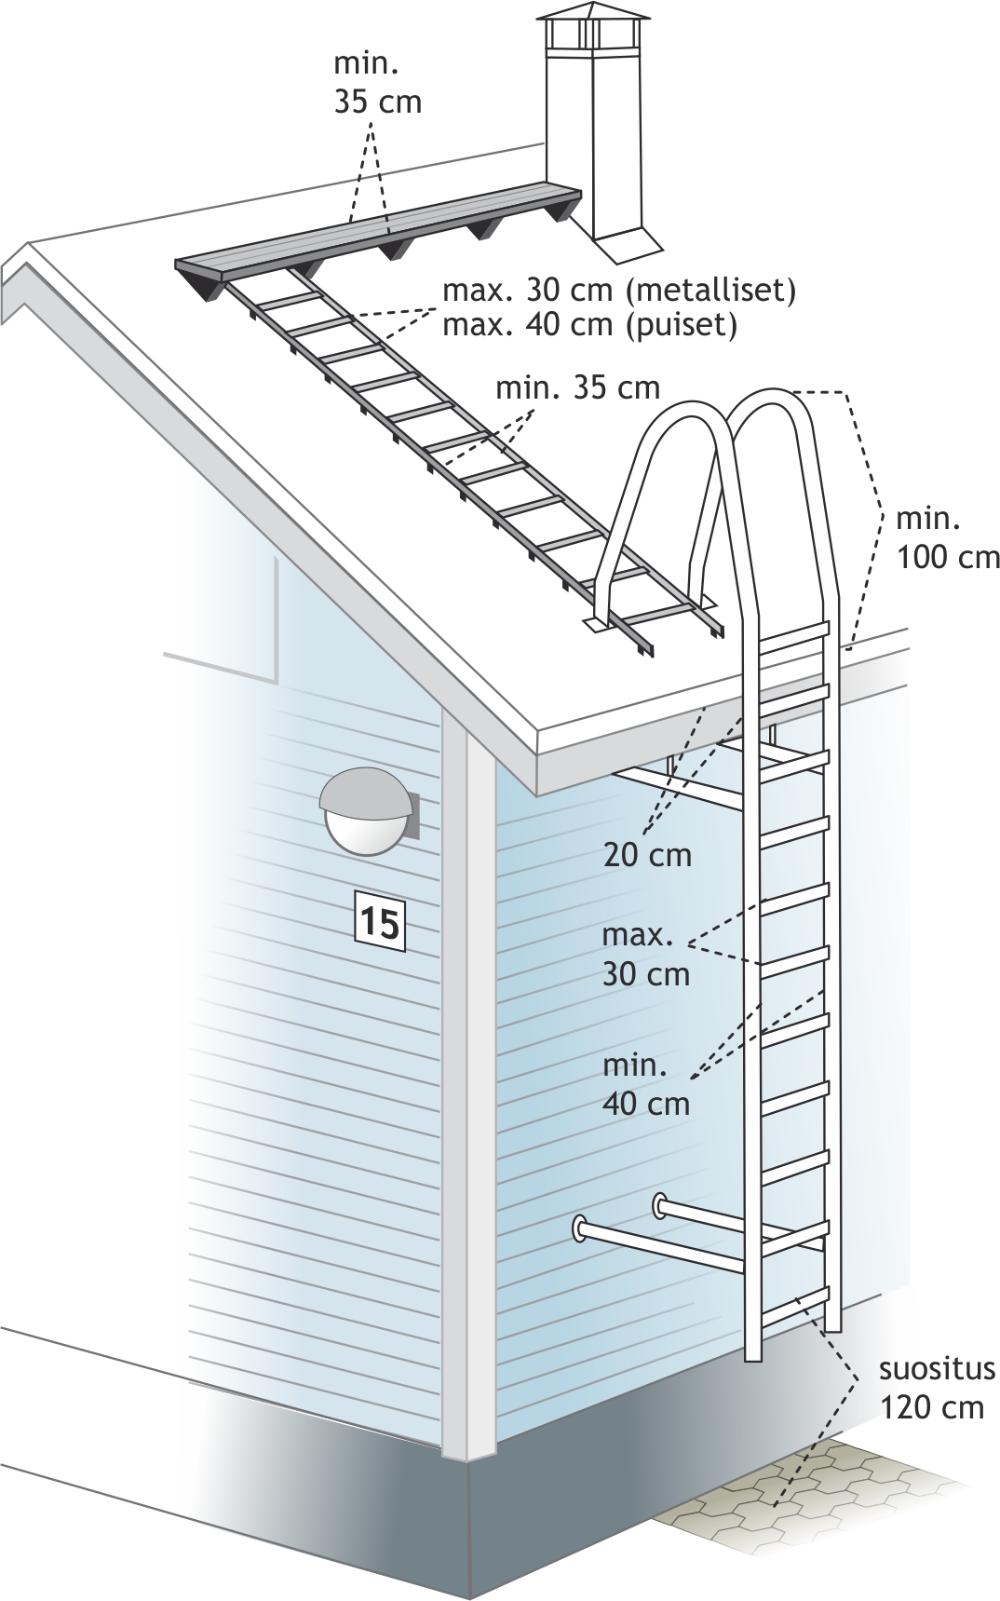 ladders with dimensions